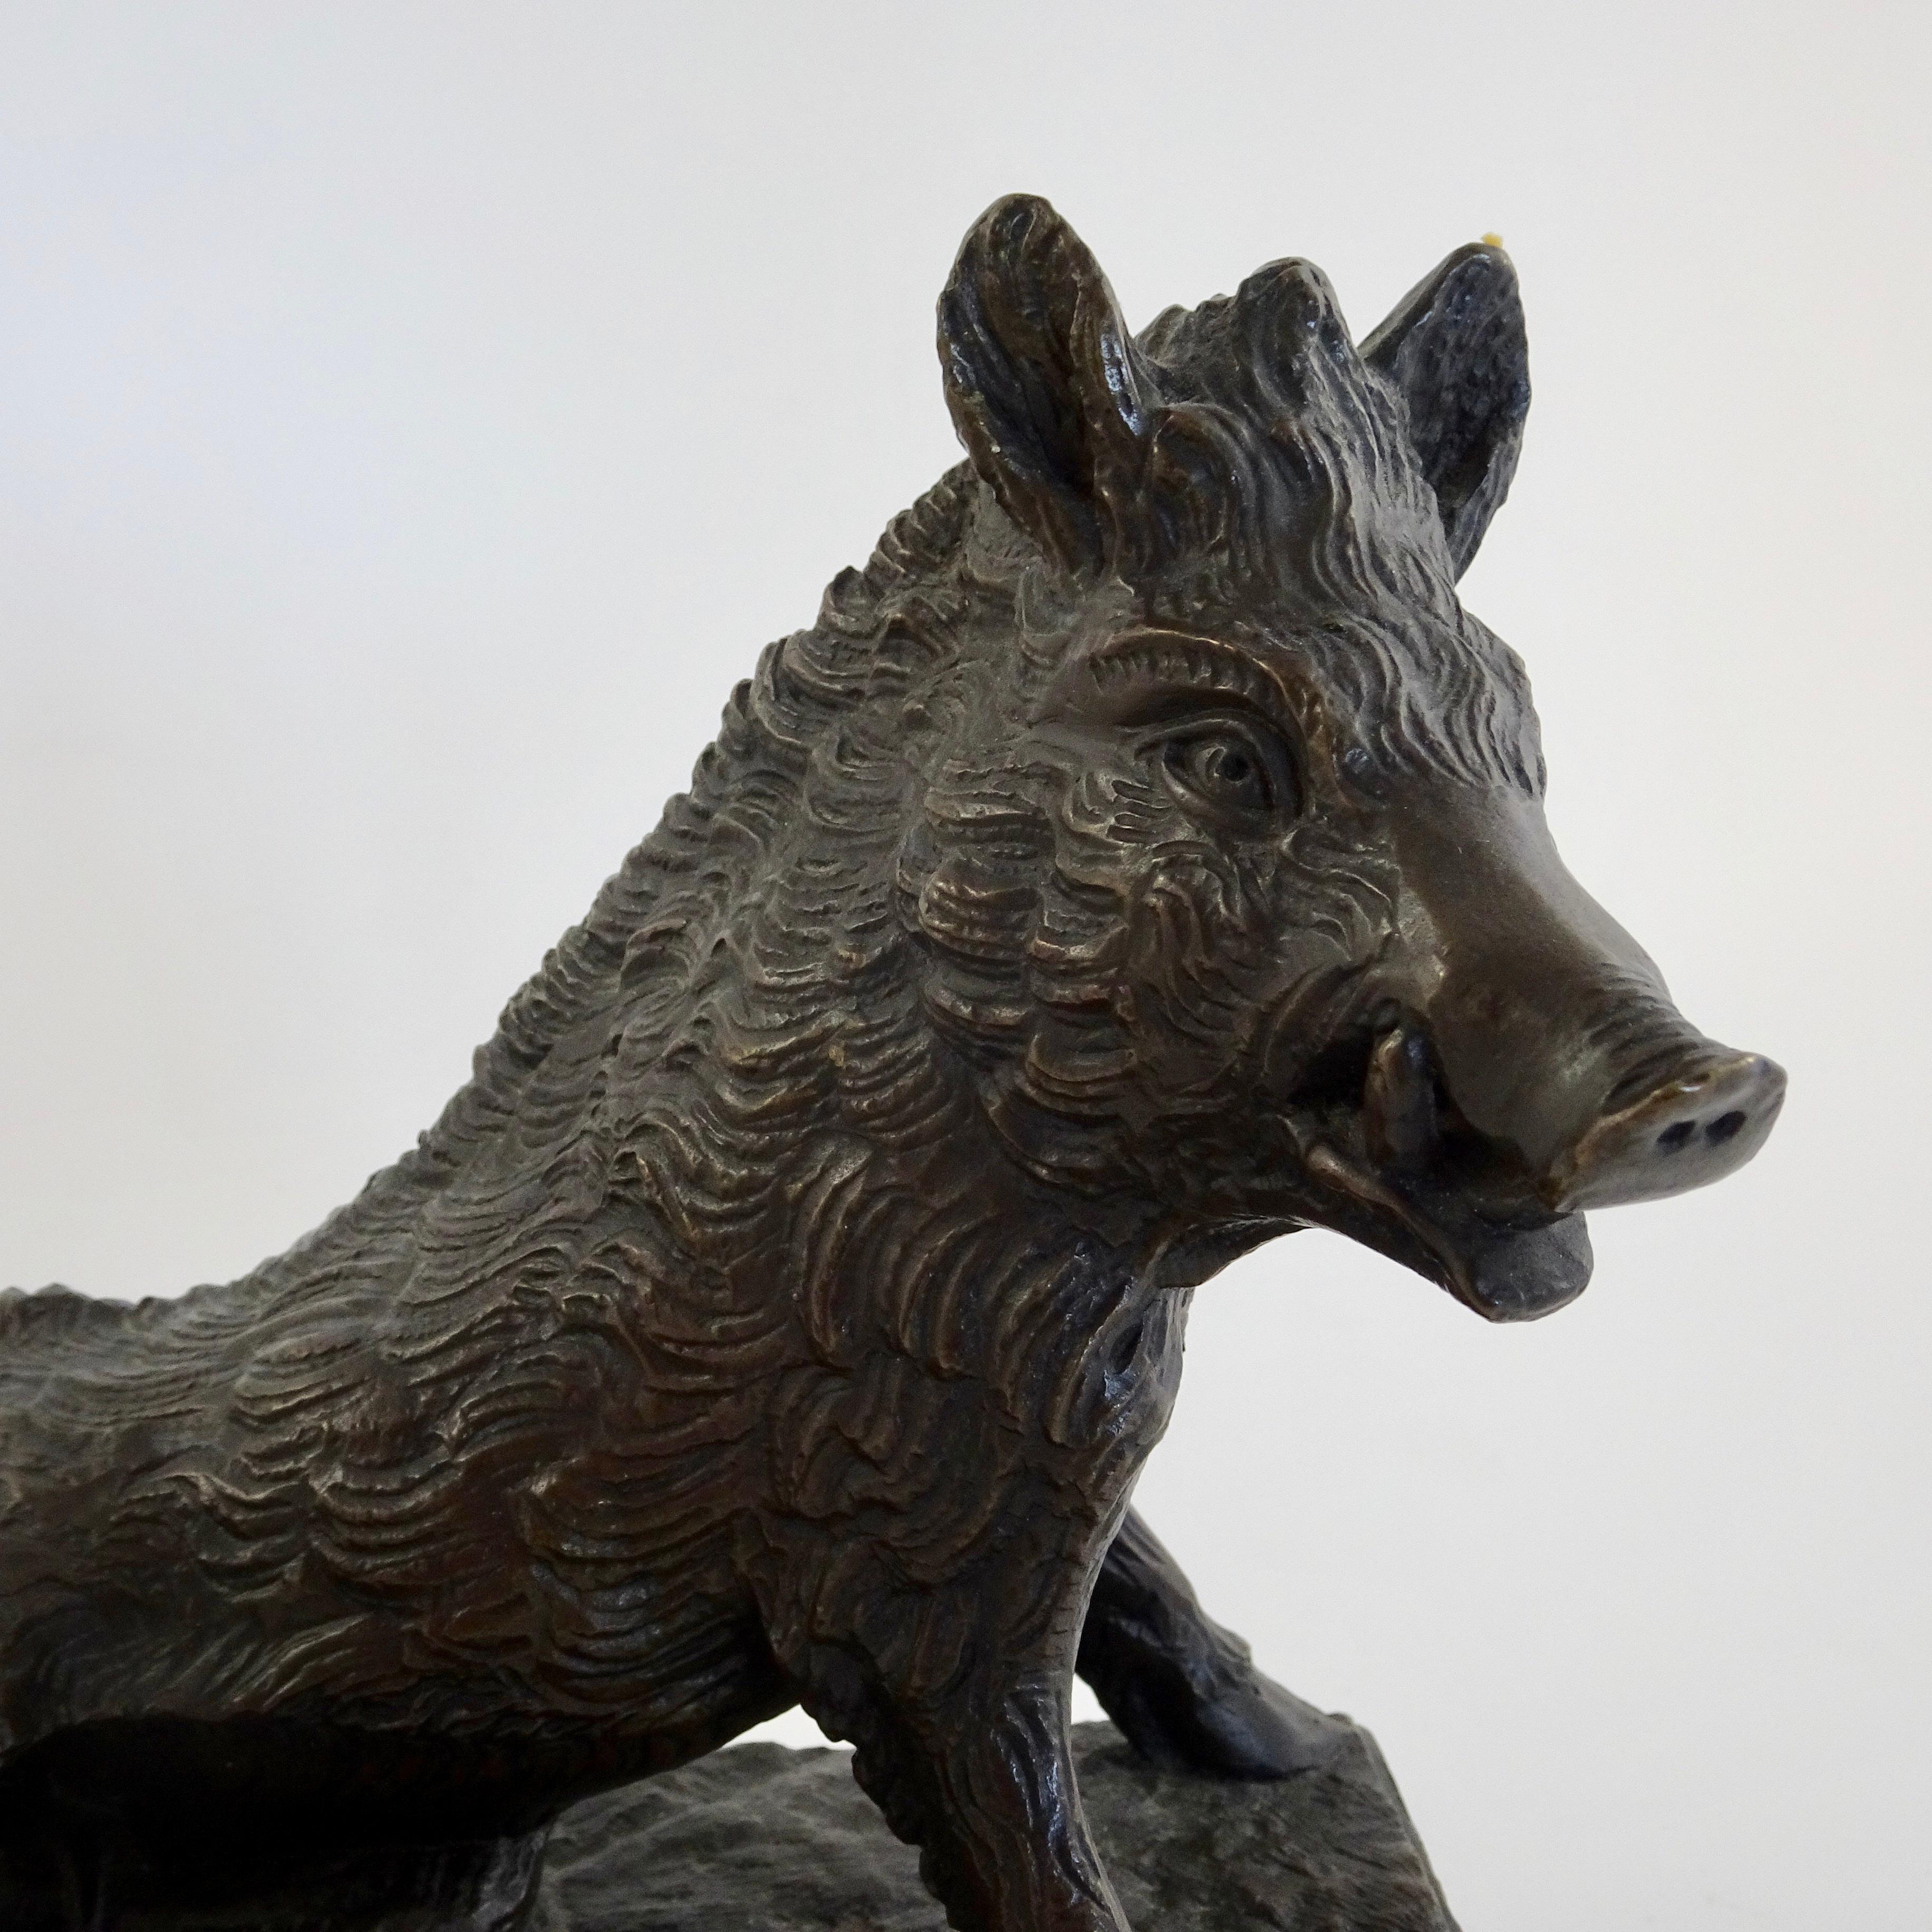 19th century black bronze boar figurine sculpted by Joseph Victor Chemin. Joseph Victor Chemin was born in Paris in 1825 and was one of Antoine Louis Barye's successful students. He first exhibited at the Salon of 1851. His bronzes were of domestic